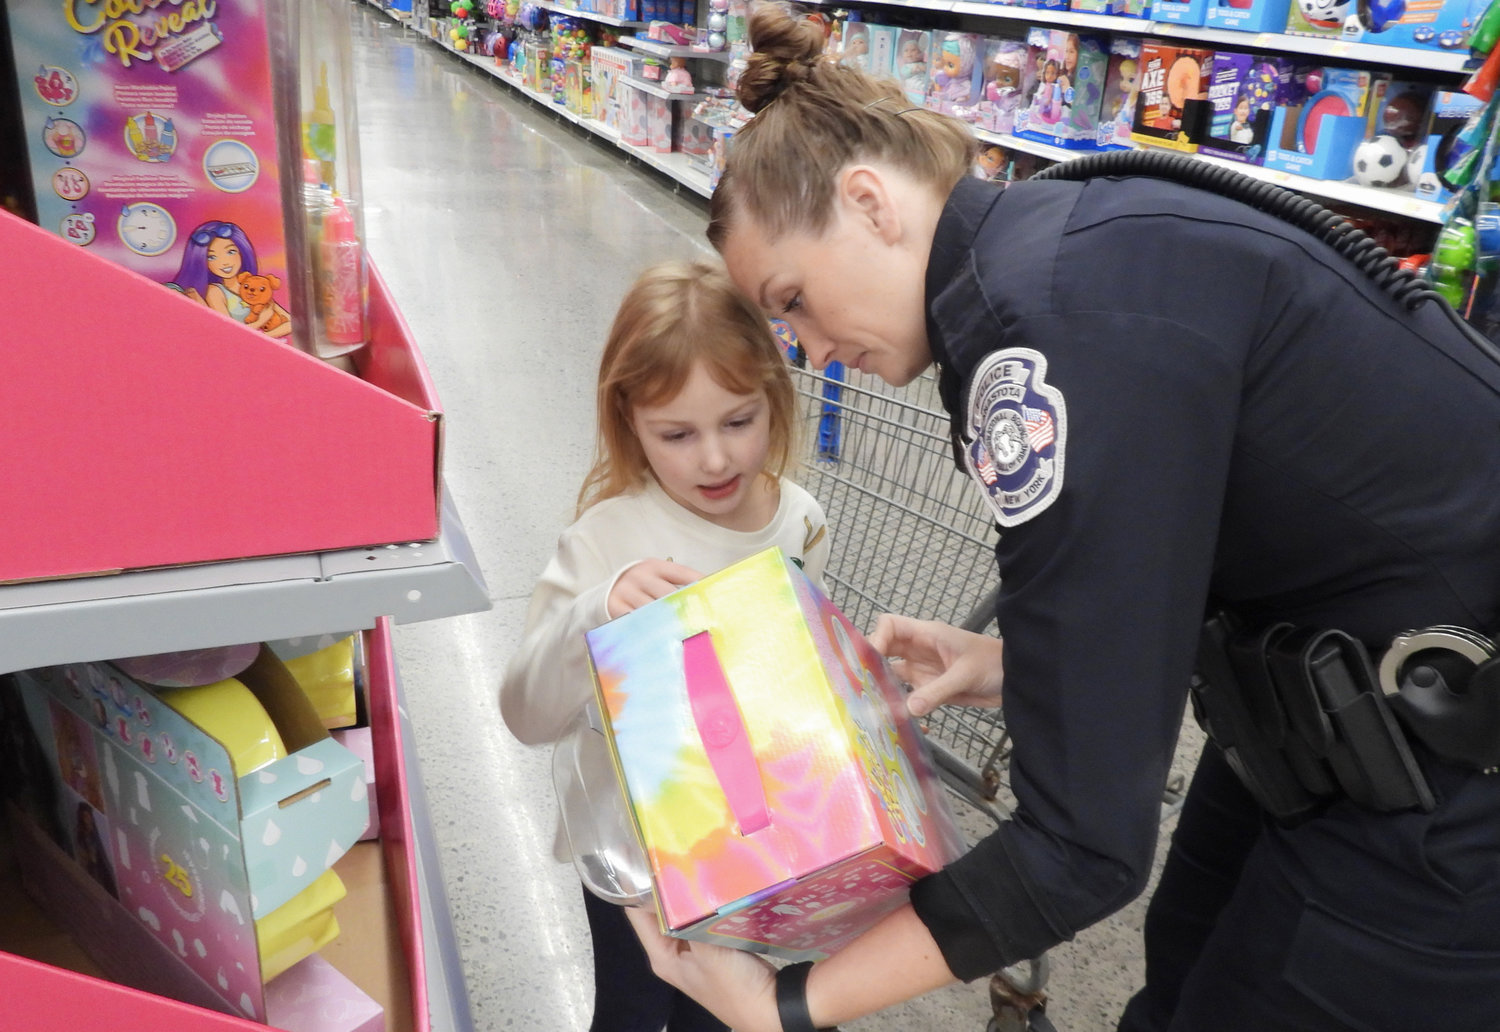 More than 80 children got a chance to shop with a cop at the Oneida Police Department's annual Shop with a Cop, where they got to meet and talk with local police officers while shopping for everything on their Christmas list. Pictured is five-year-old Olivia Boncella, shopping with Officer Cassandra Dailey with the Canastota Police Department.